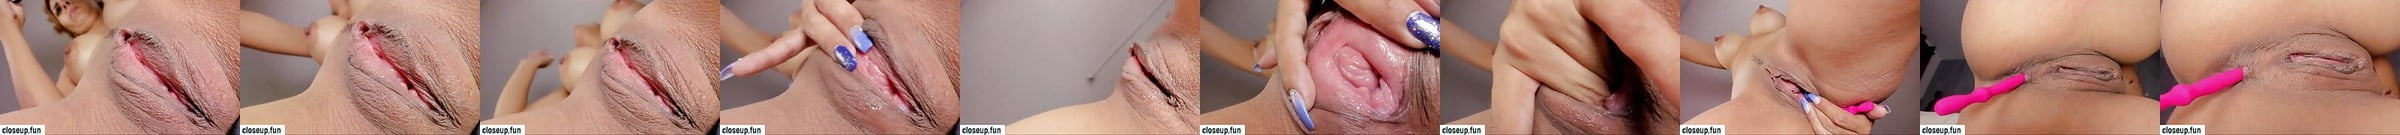 My Best Dripping Wet Pussy Compilation Slowmen17 Porn 74 Xhamster